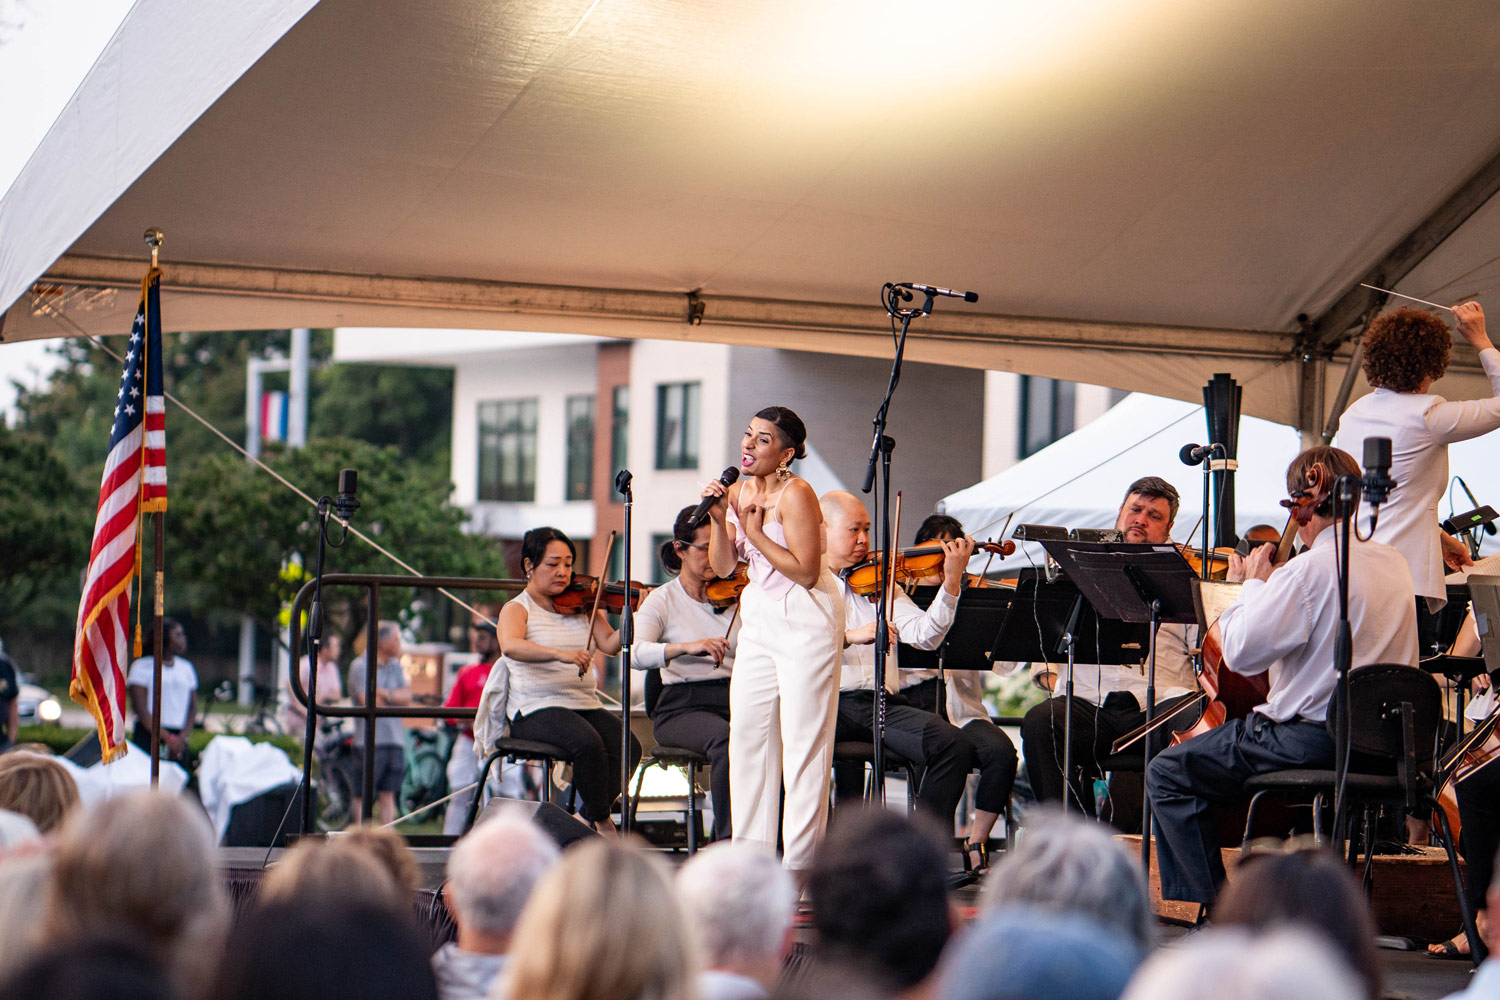 A rousing performance during the Symphony on the Lawn event held at The Historic Cavalier Hotel